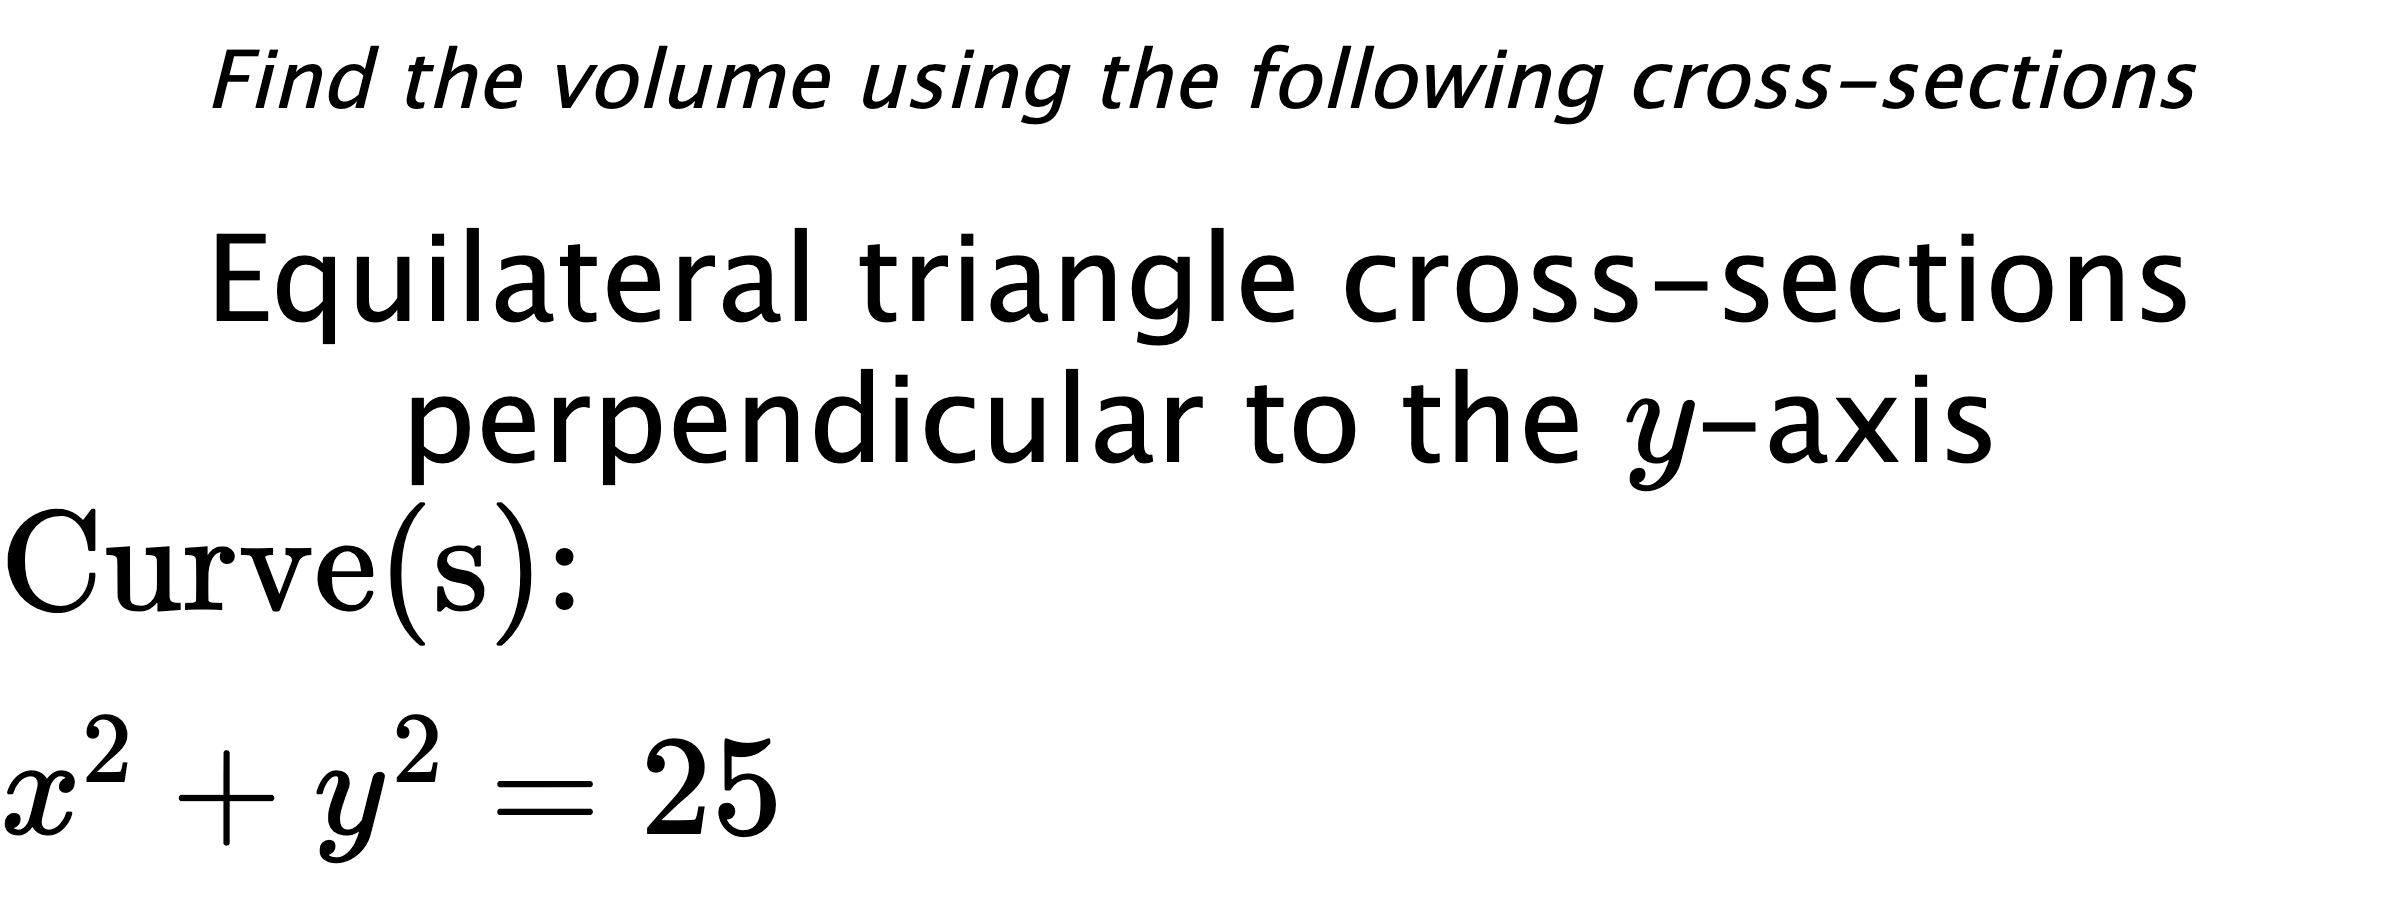 Find the volume using the following cross-sections Equilateral triangle cross-sections perpendicular to the $ y $-axis $ \\ \text{Curve(s):} \\ x^{2}+y^{2}=25 $